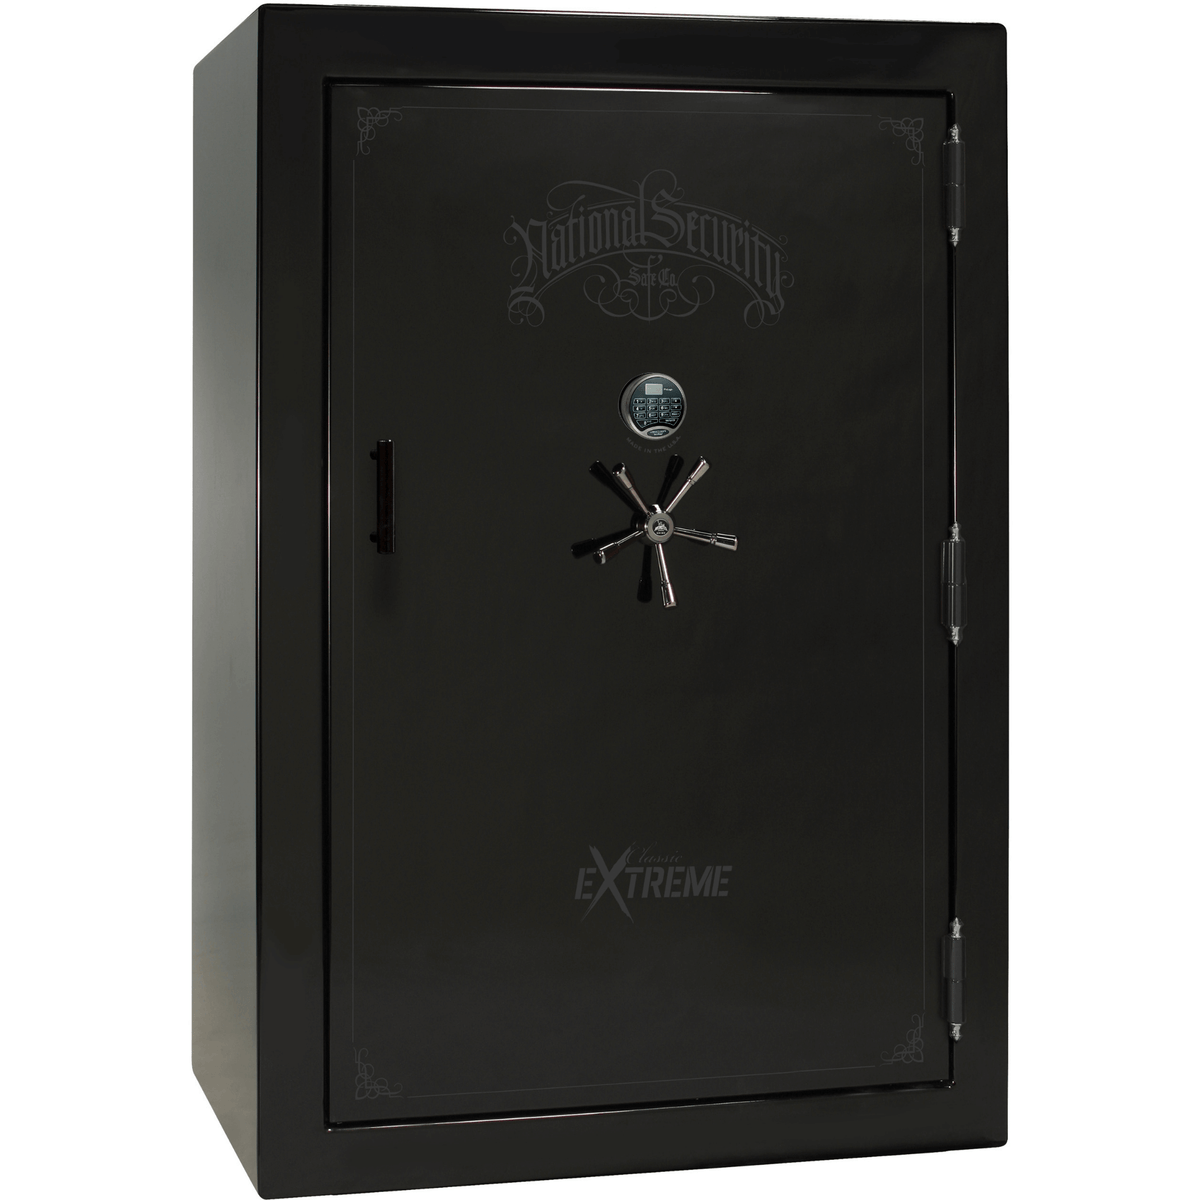 Classic extreme series | level 6 security | 90 minute fire protection - Black Gloss - Electronic - MODLOCK